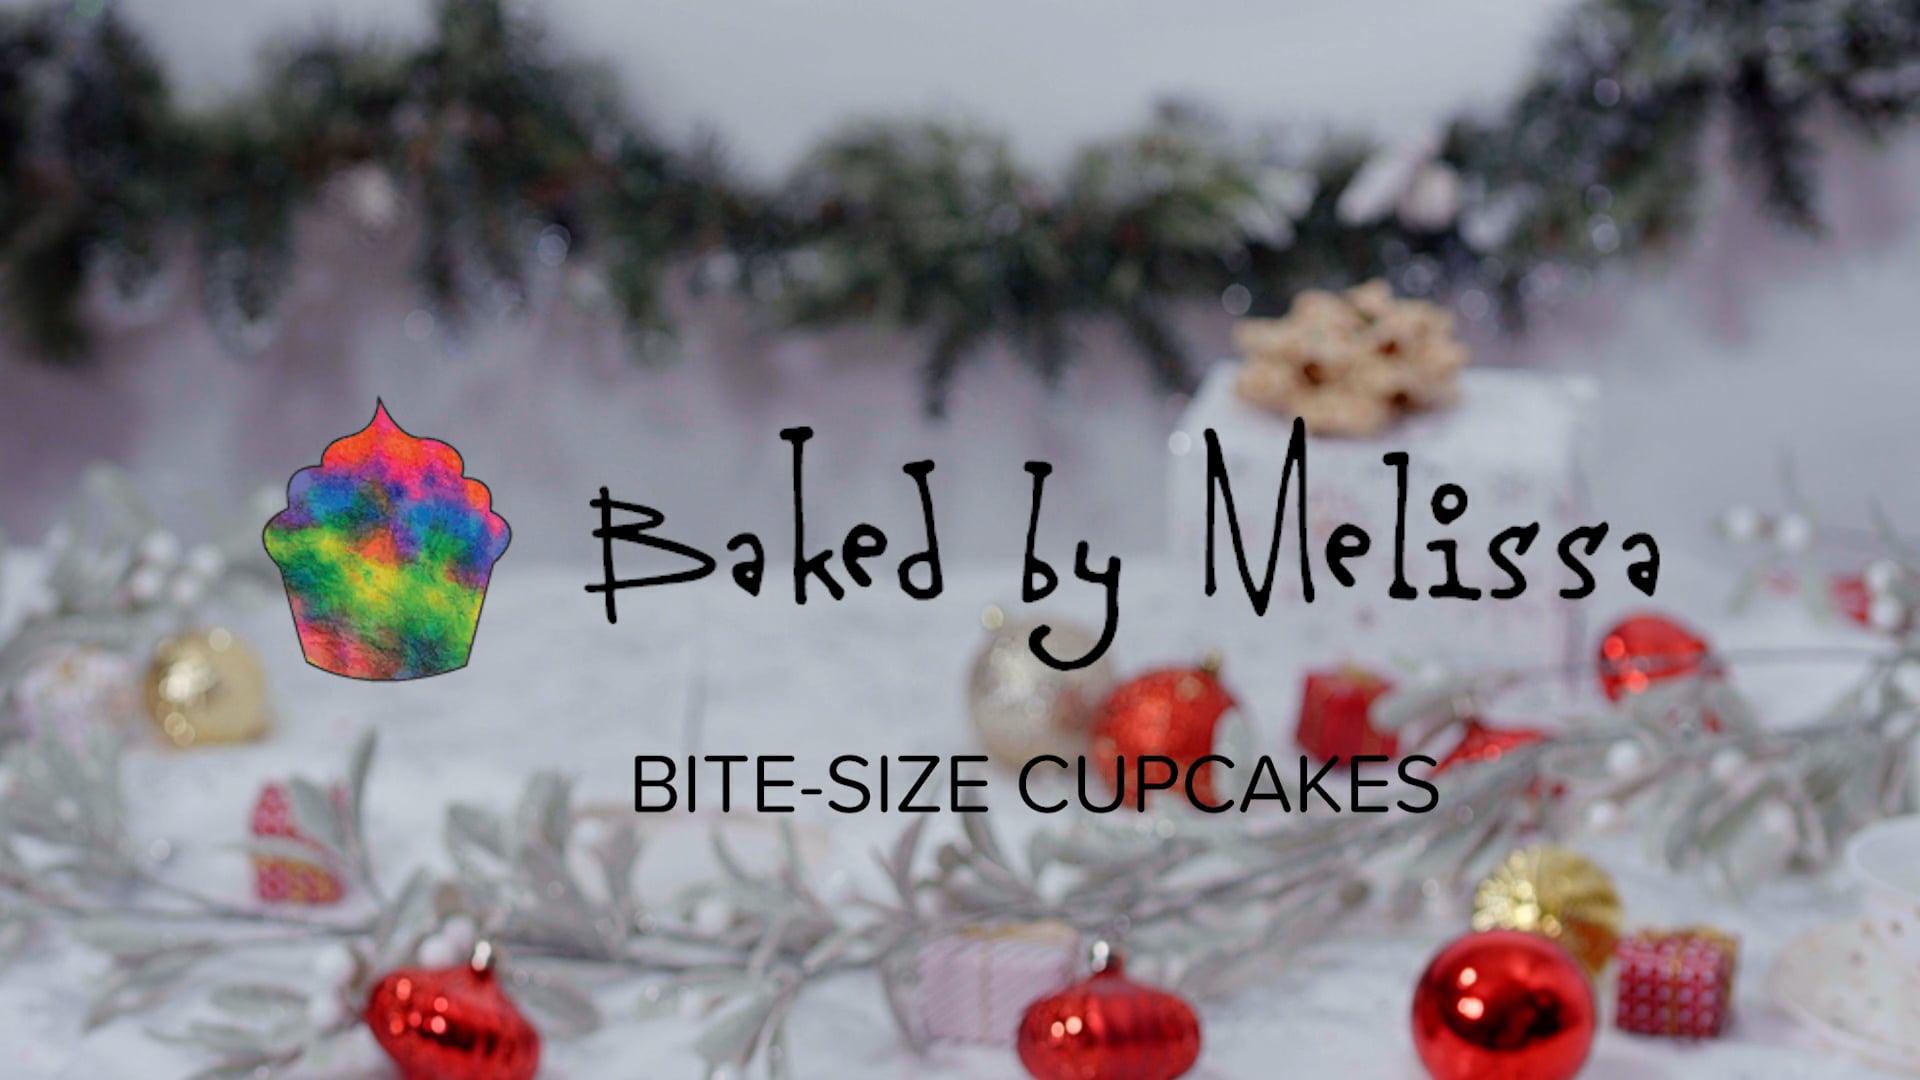 Baked By Melissa Holiday Commercial 2021